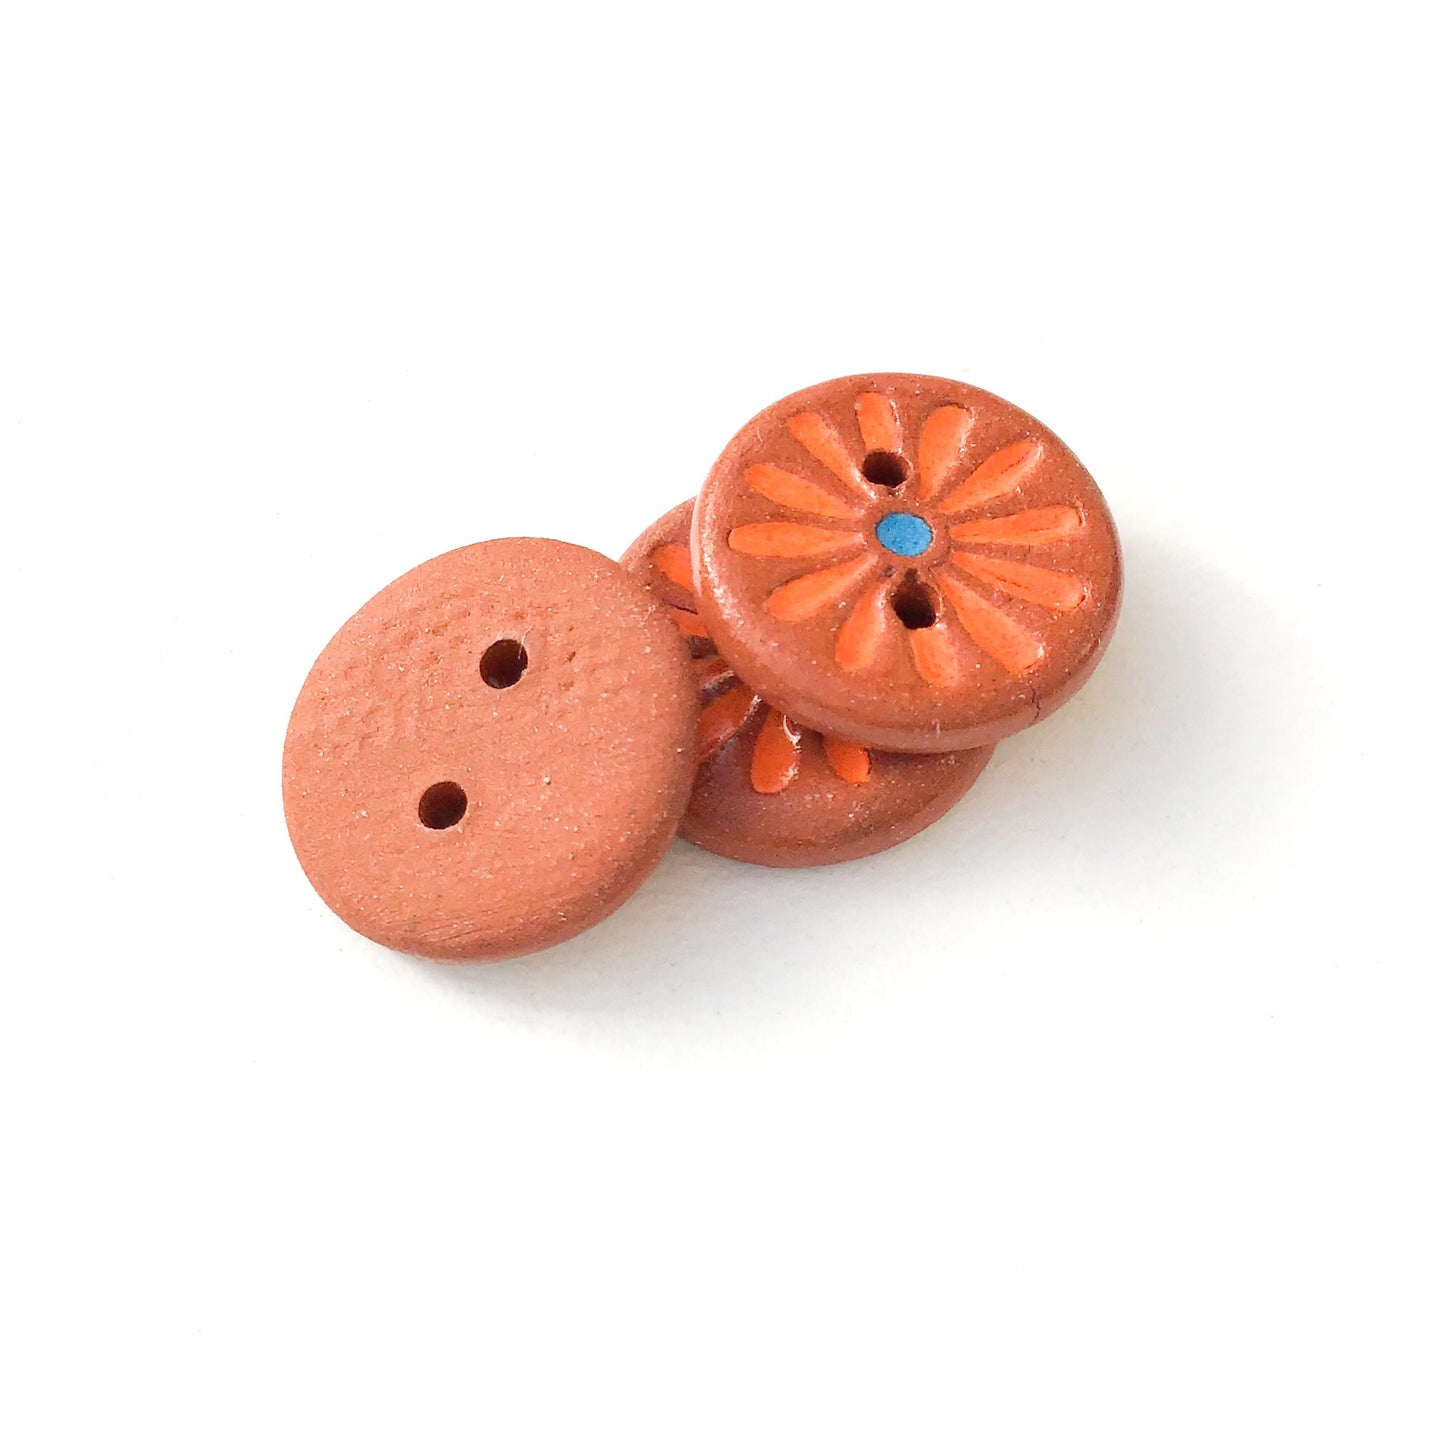 Bright Orange Daisy Buttons on Brown Clay - Ceramic Flower Buttons - 5/8" - 3 Pack (ws-14)